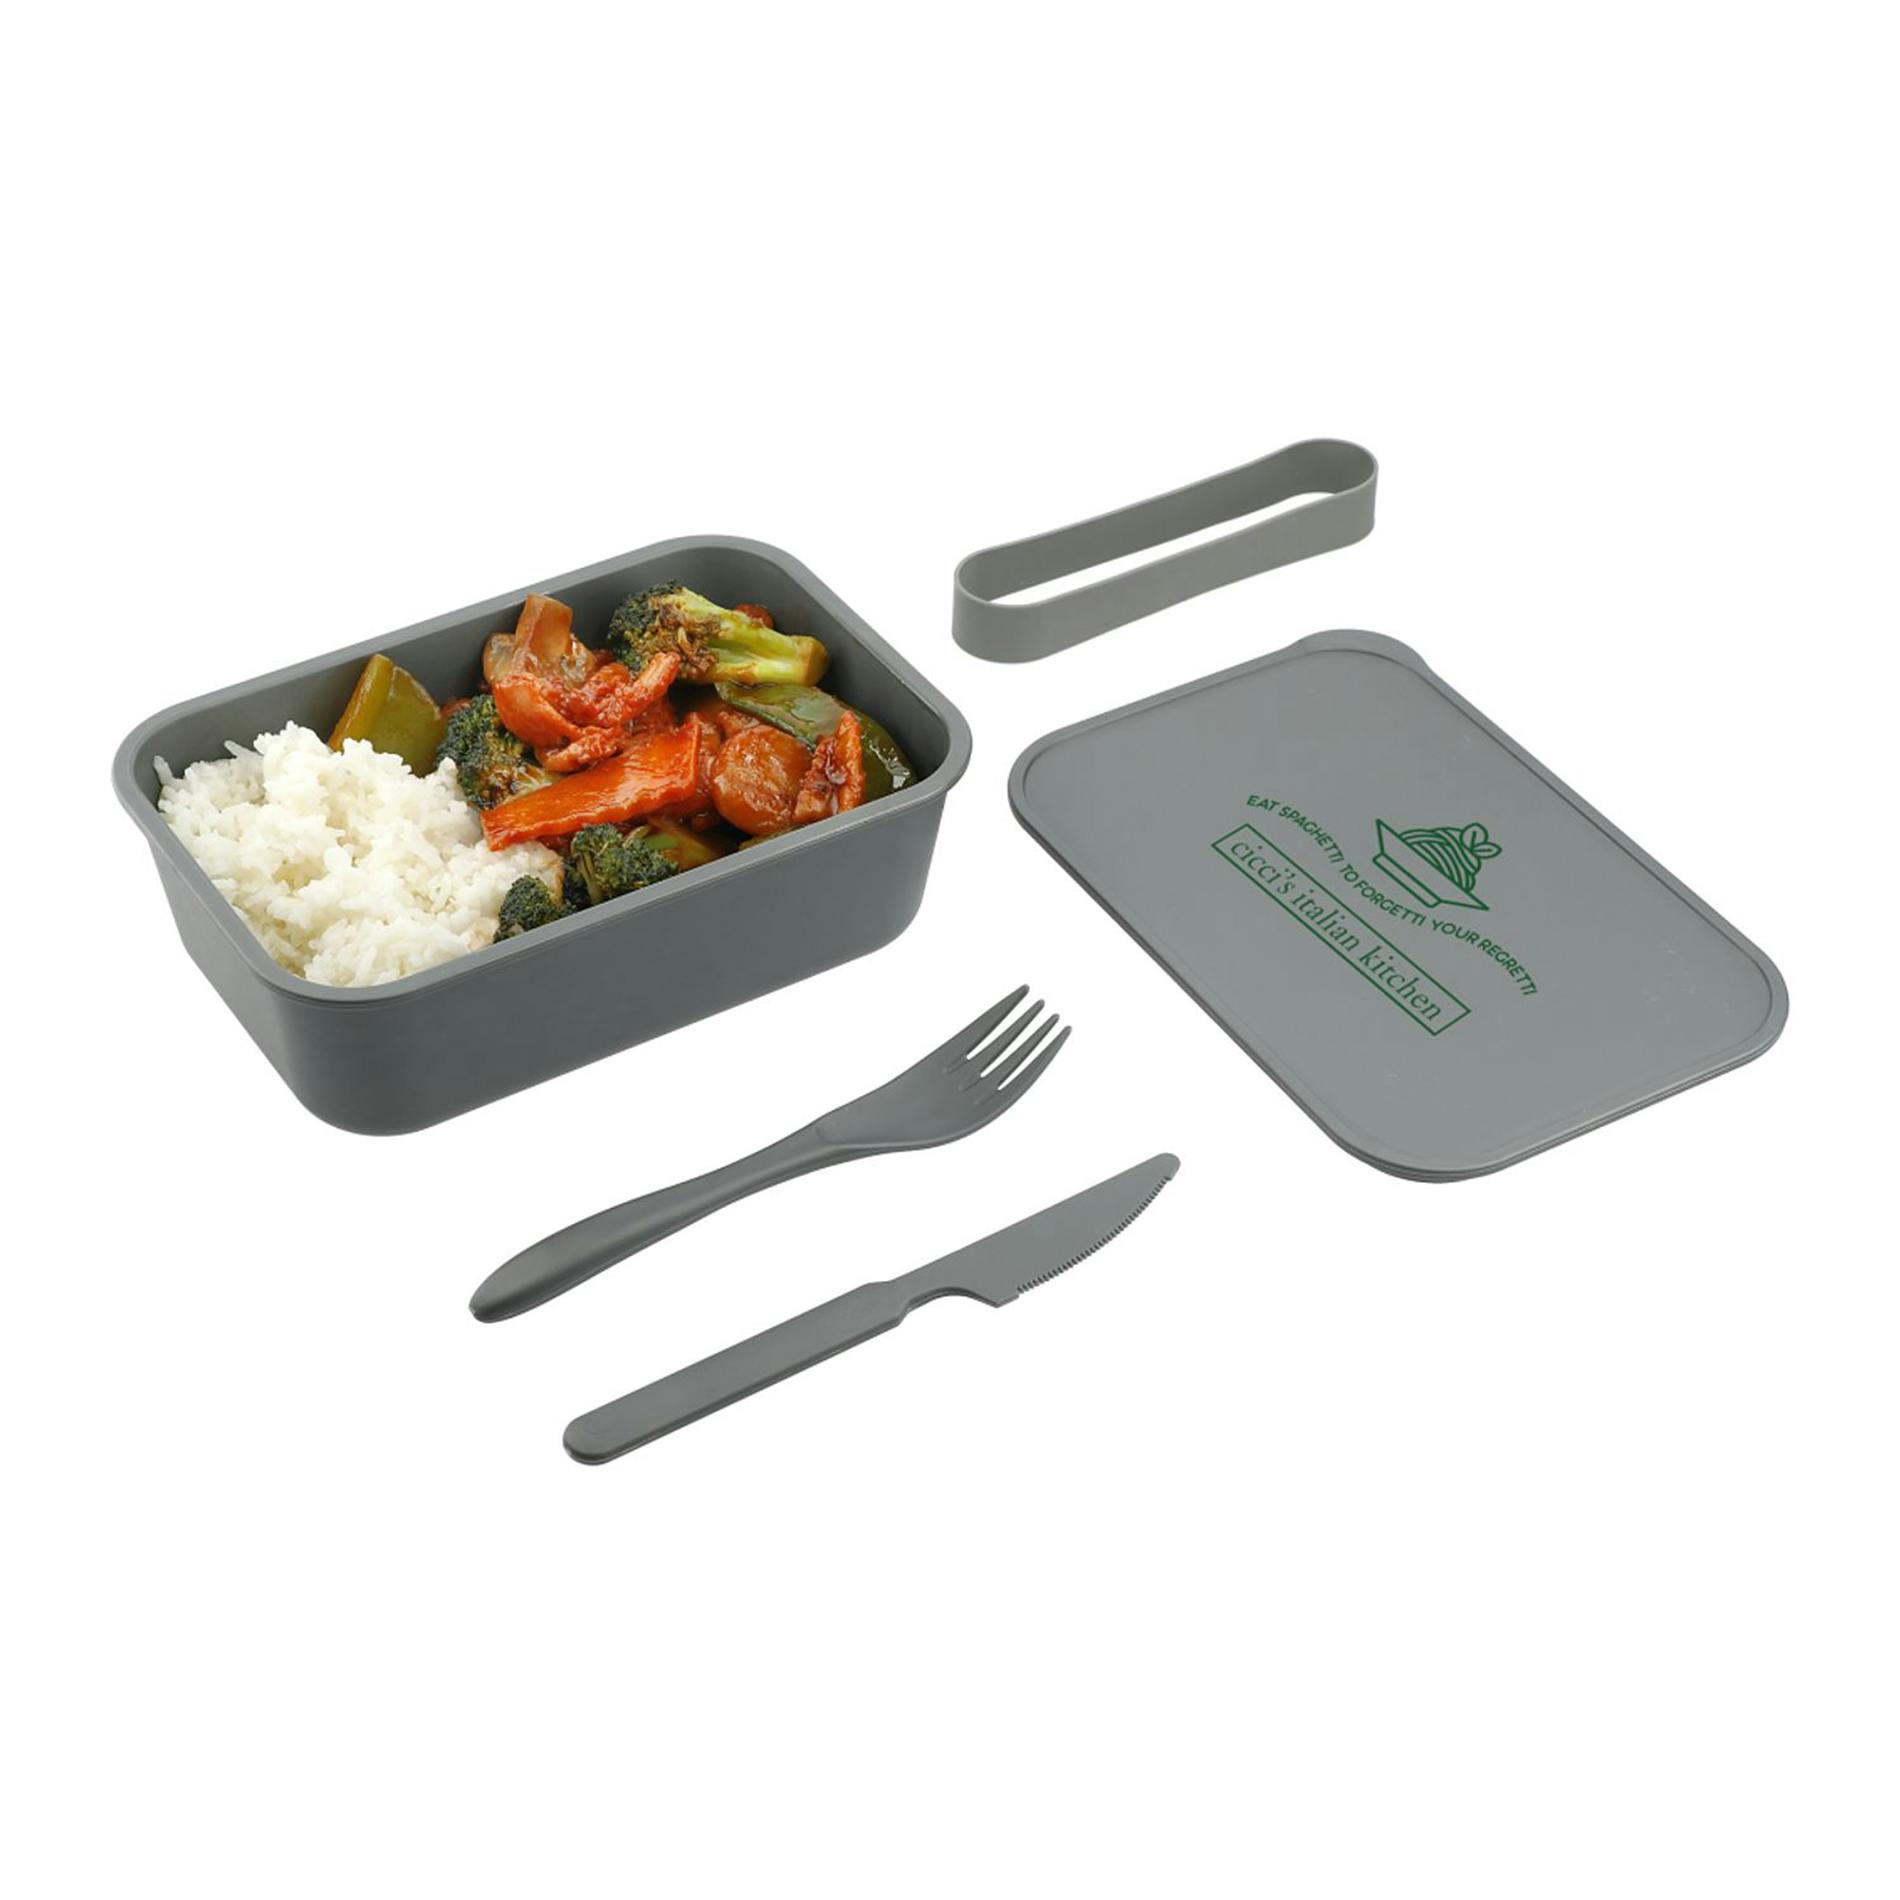 PLA Bento Box with Band and Utensils - additional Image 5